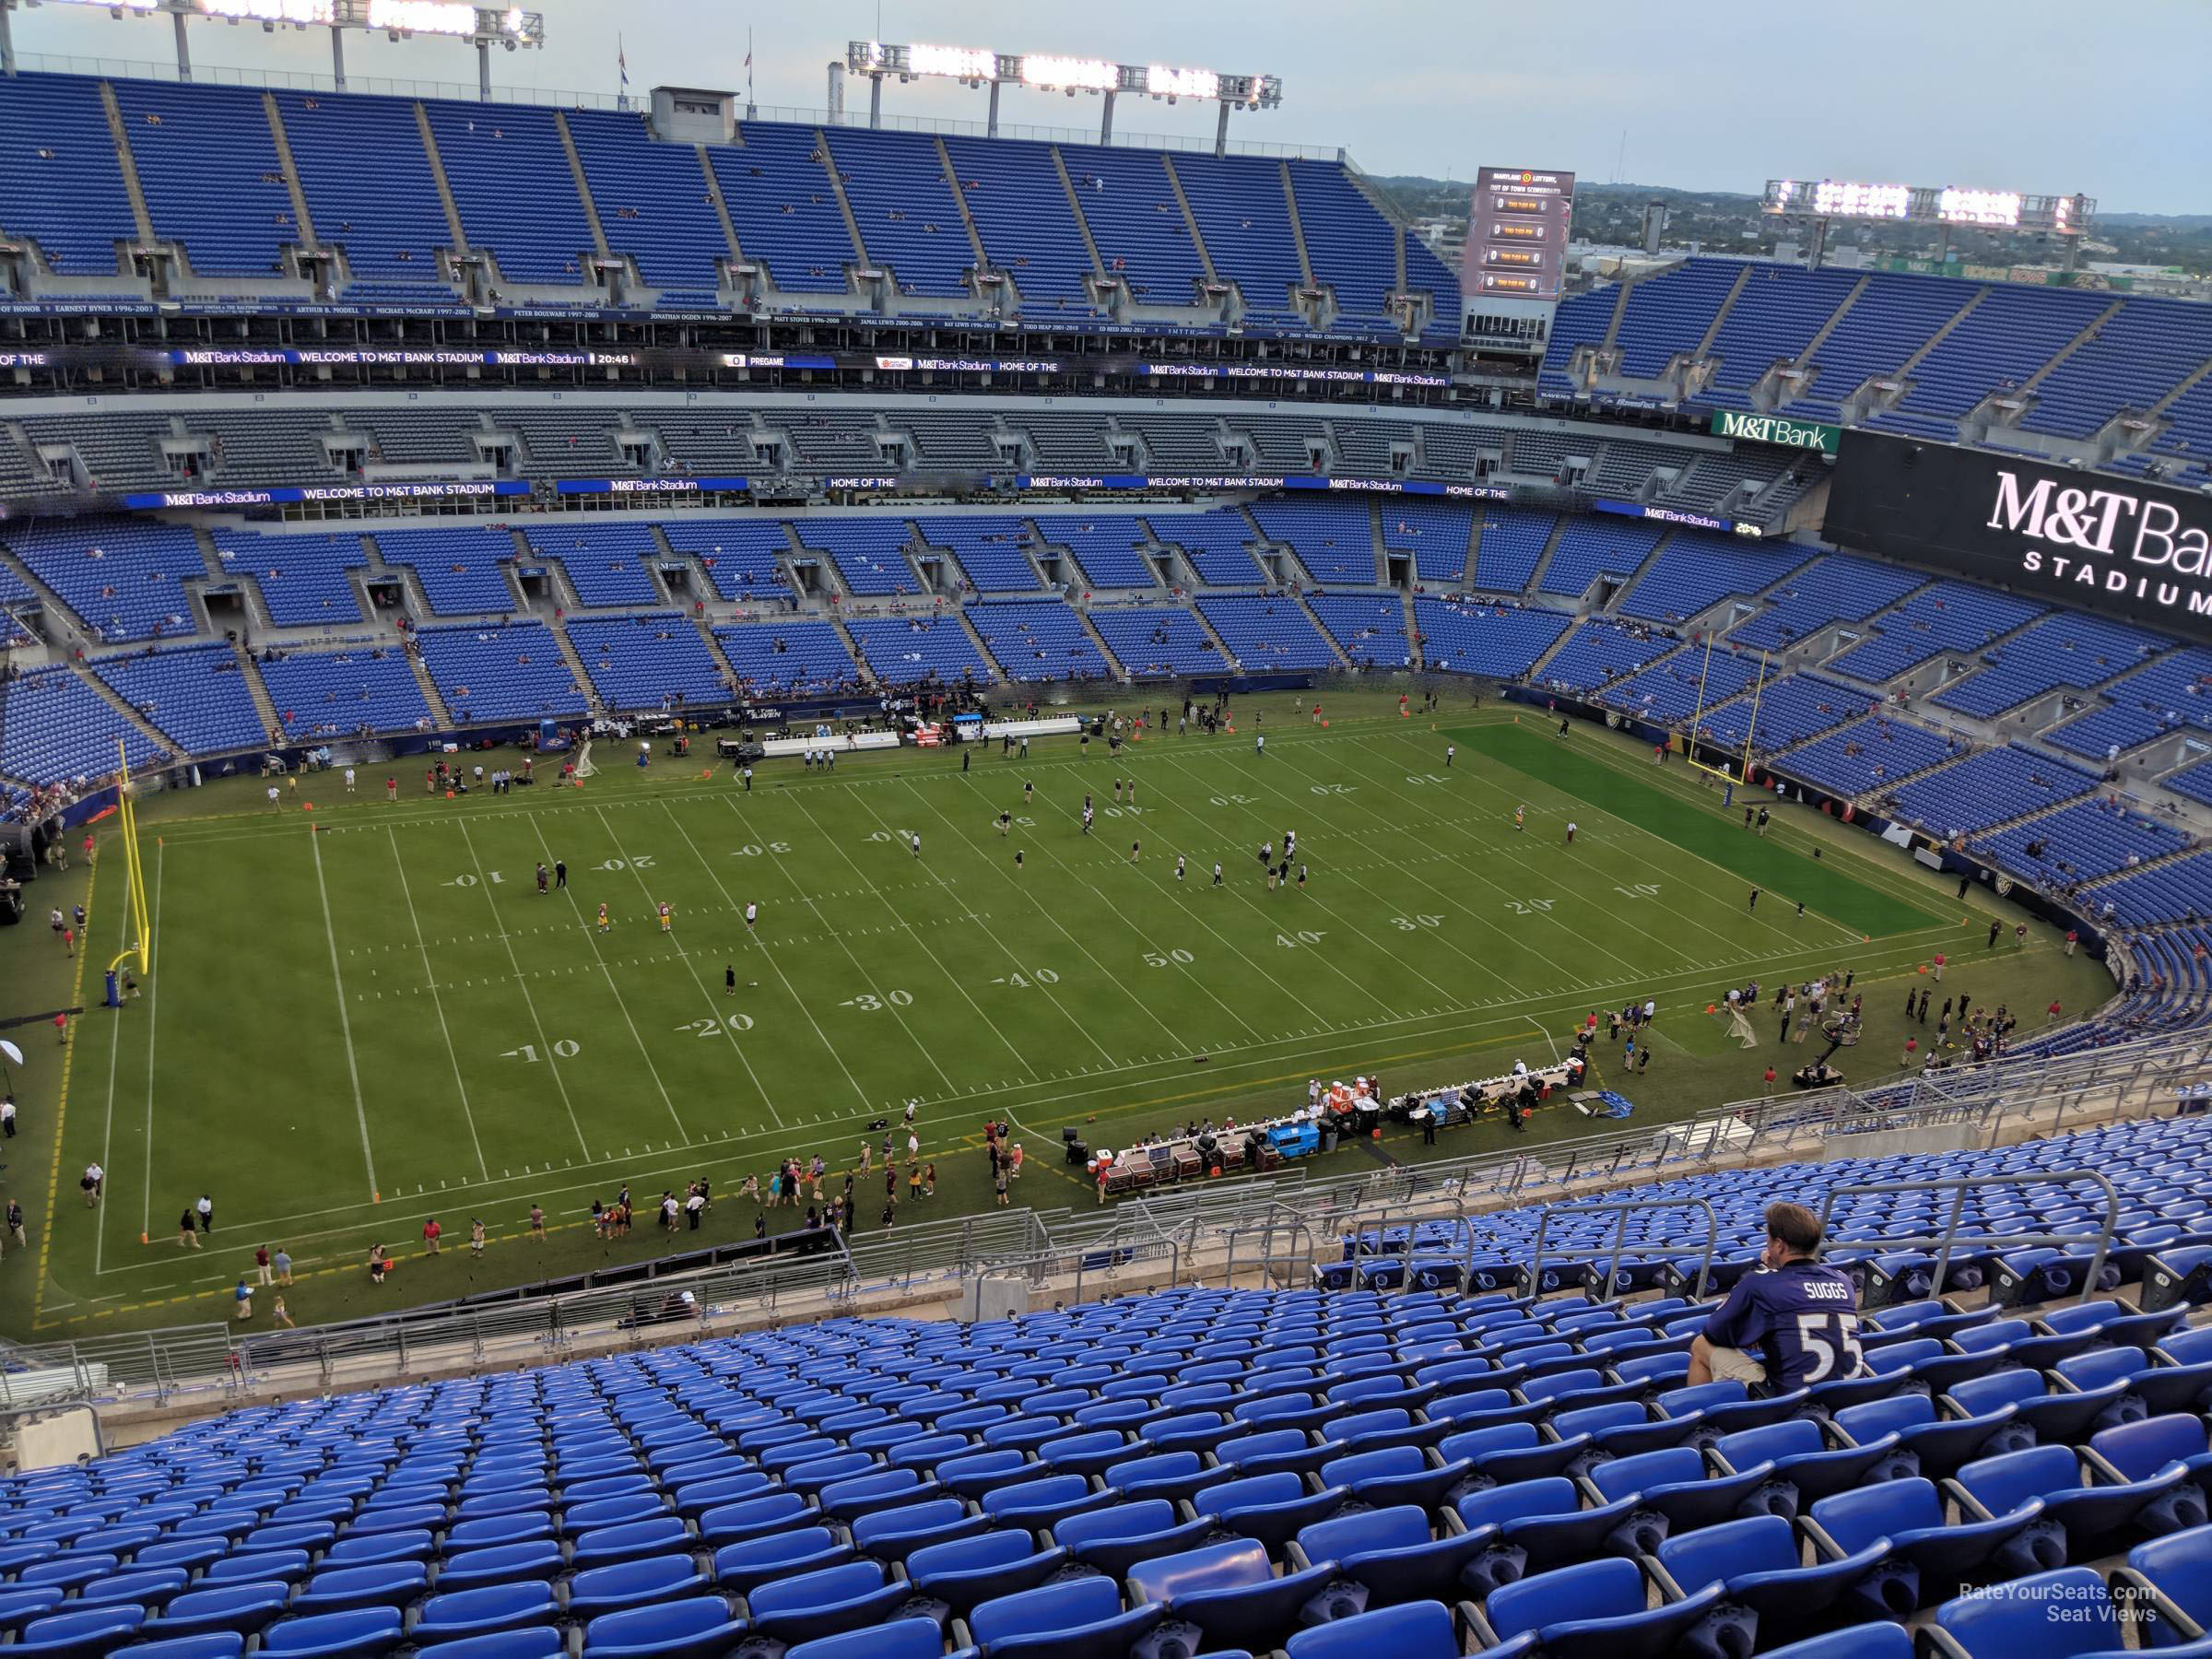 section 503, row 26 seat view  for football - m&t bank stadium